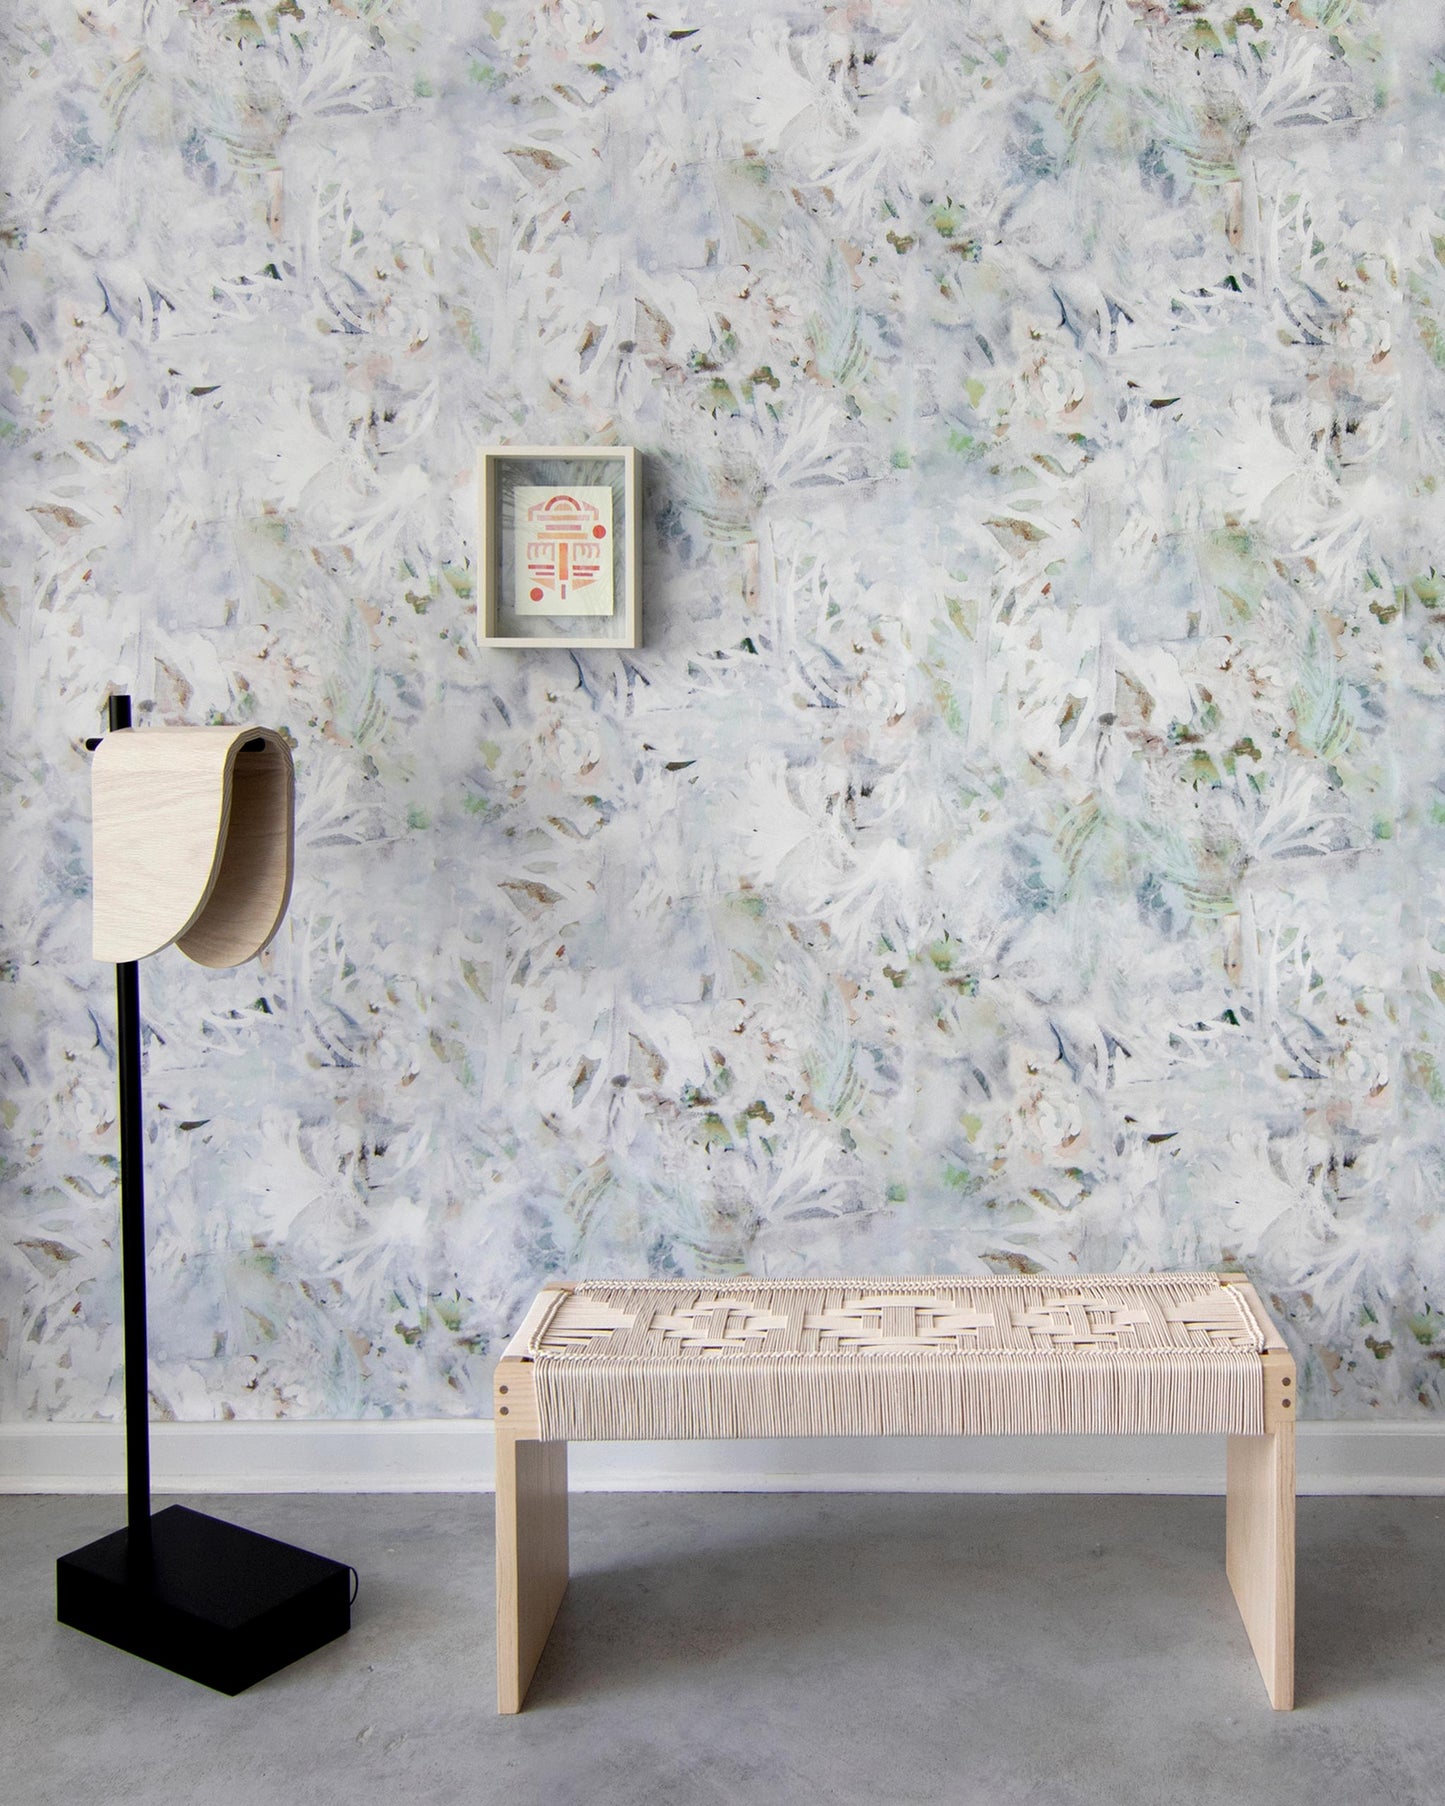 A bench in front of a Cortile Wallpaper Aqua wall